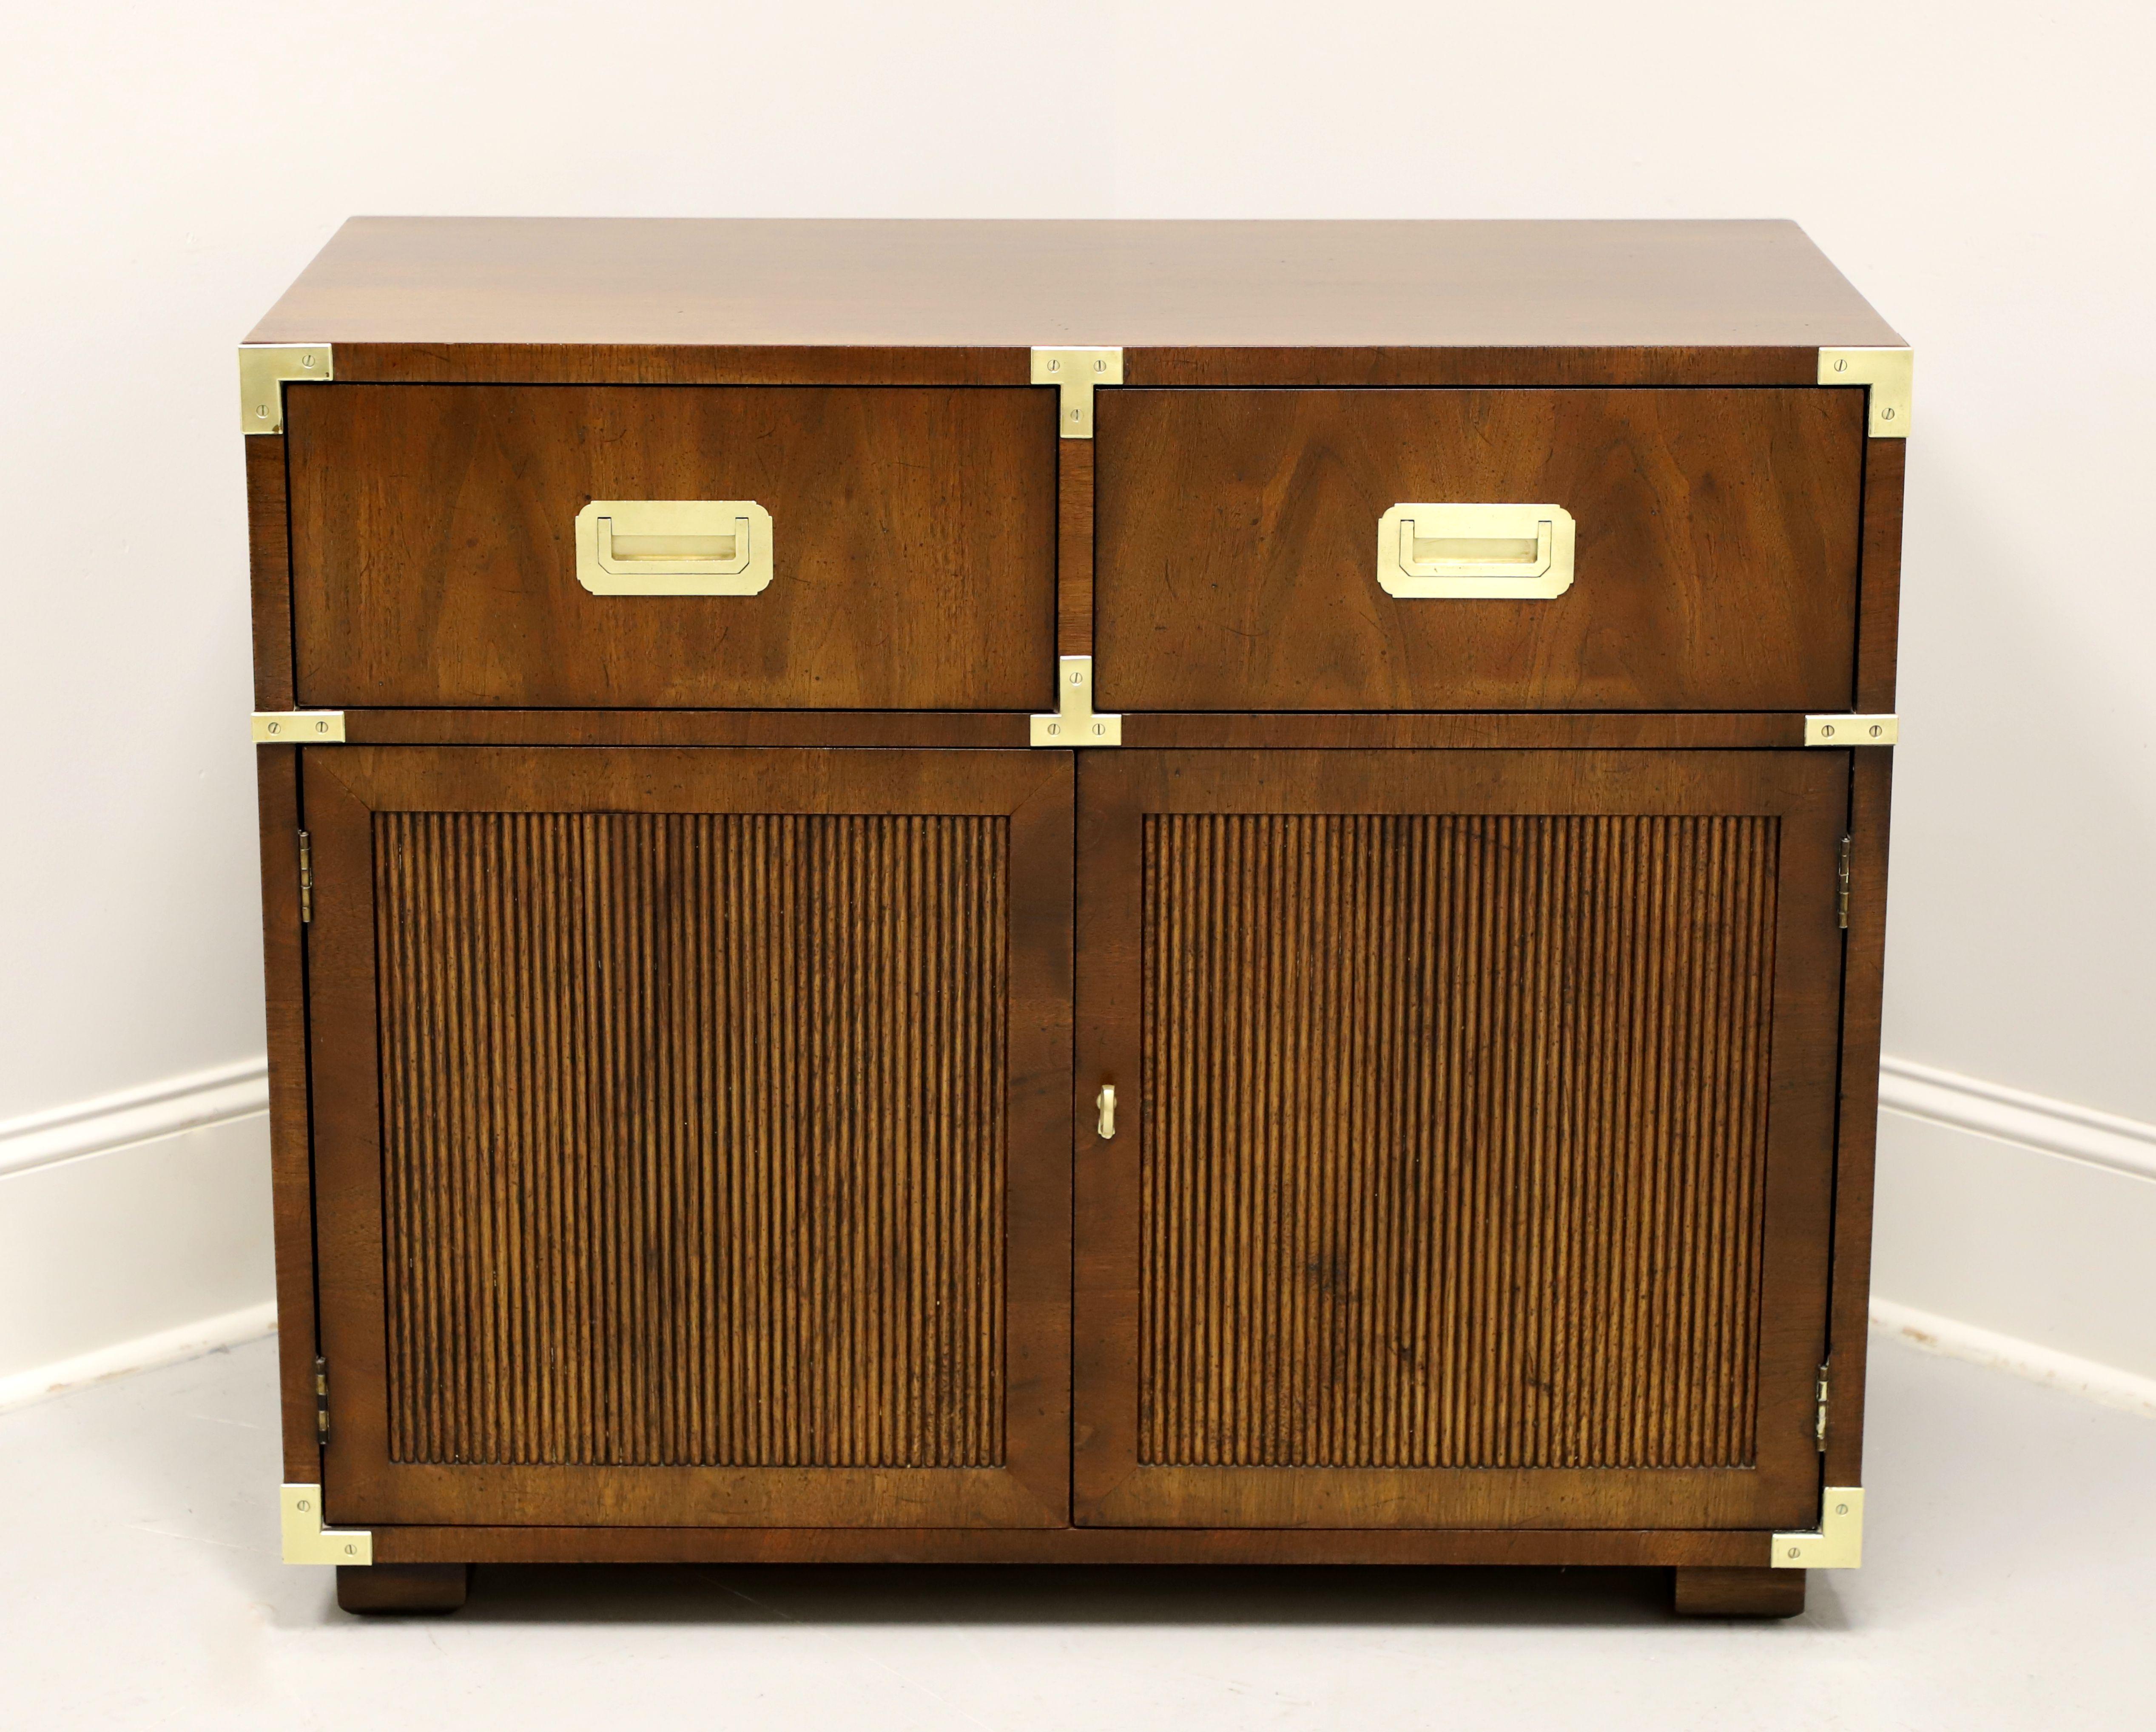 A campaign style console cabinet by Henredon. Walnut with a slightly distressed finish, brass accents & hardware, smooth edge to top, ribbed door fronts, and block feet. Features two drawers of dovetail construction over a lower two door cabinet